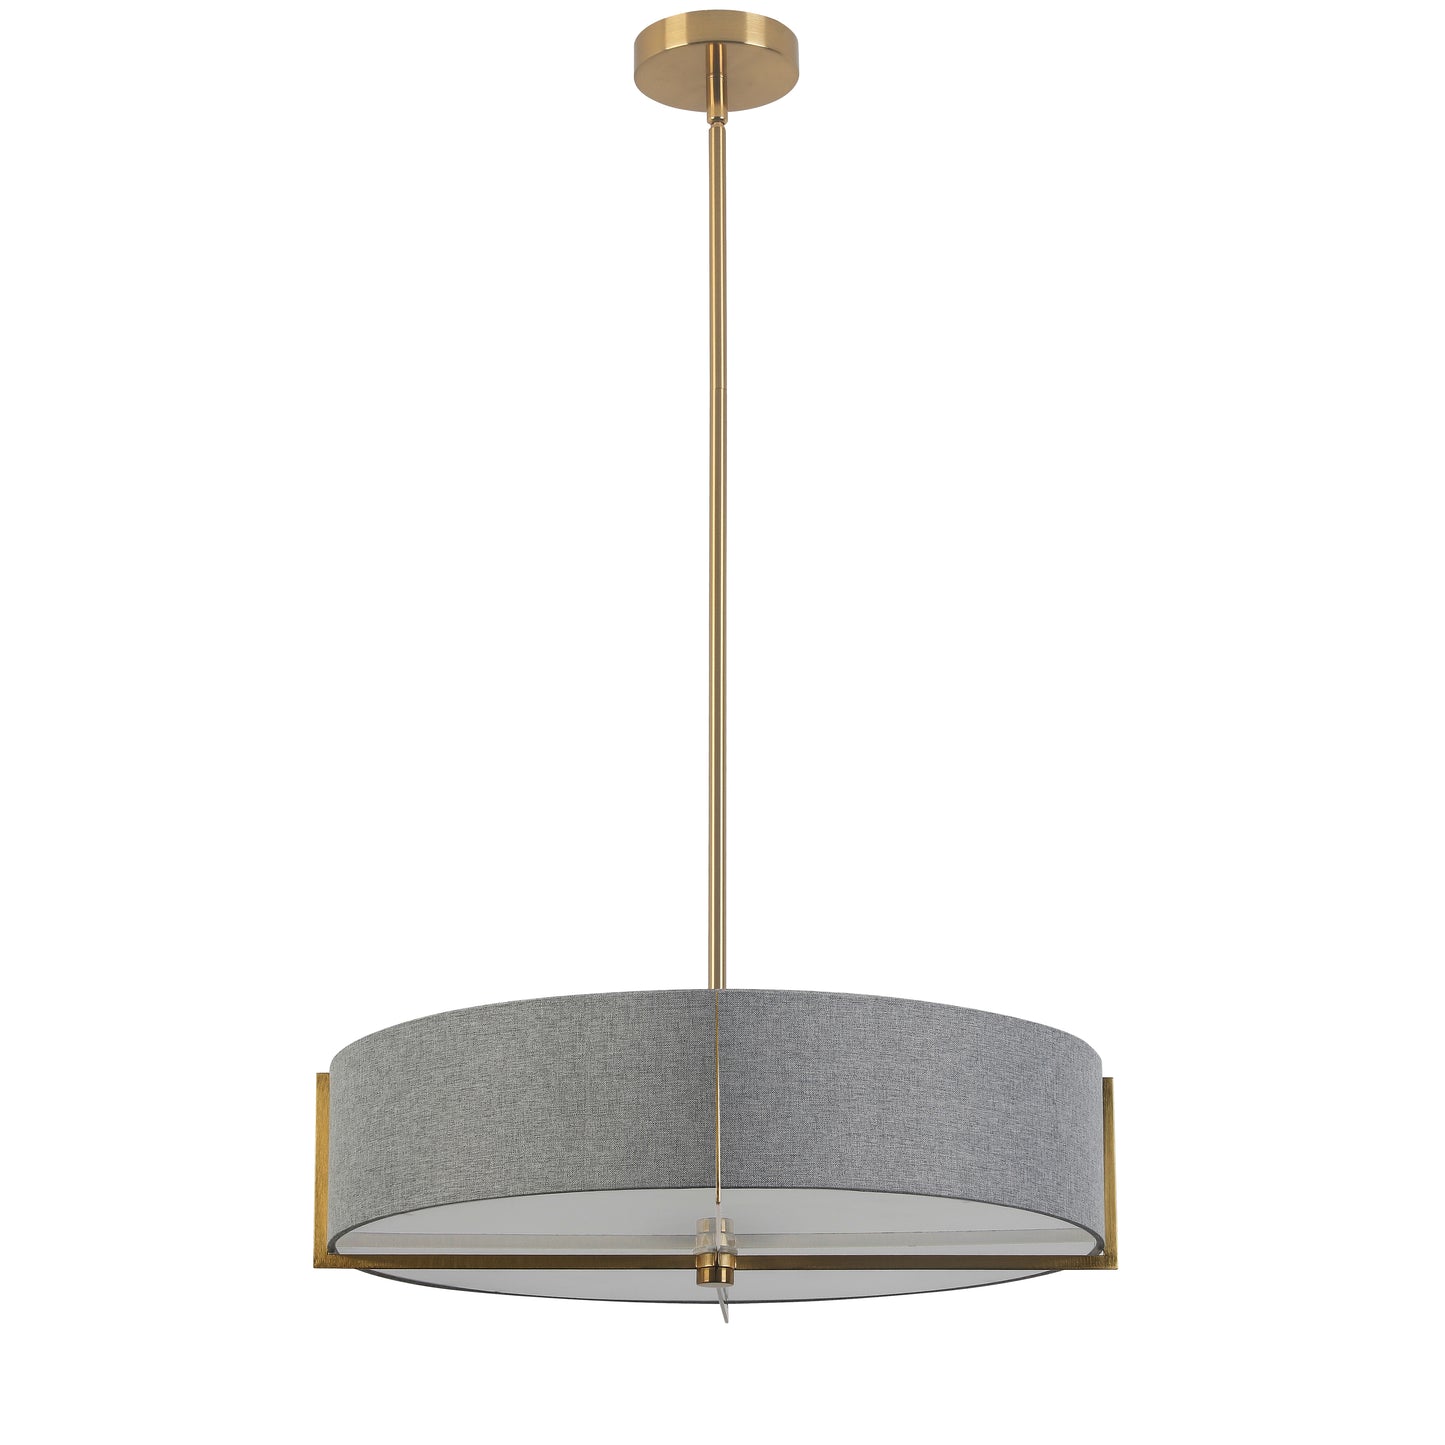 Dainolite PST-214P-AGB-GRY 4 Light Incandescent Pendant, Aged Brass with Grey Shade